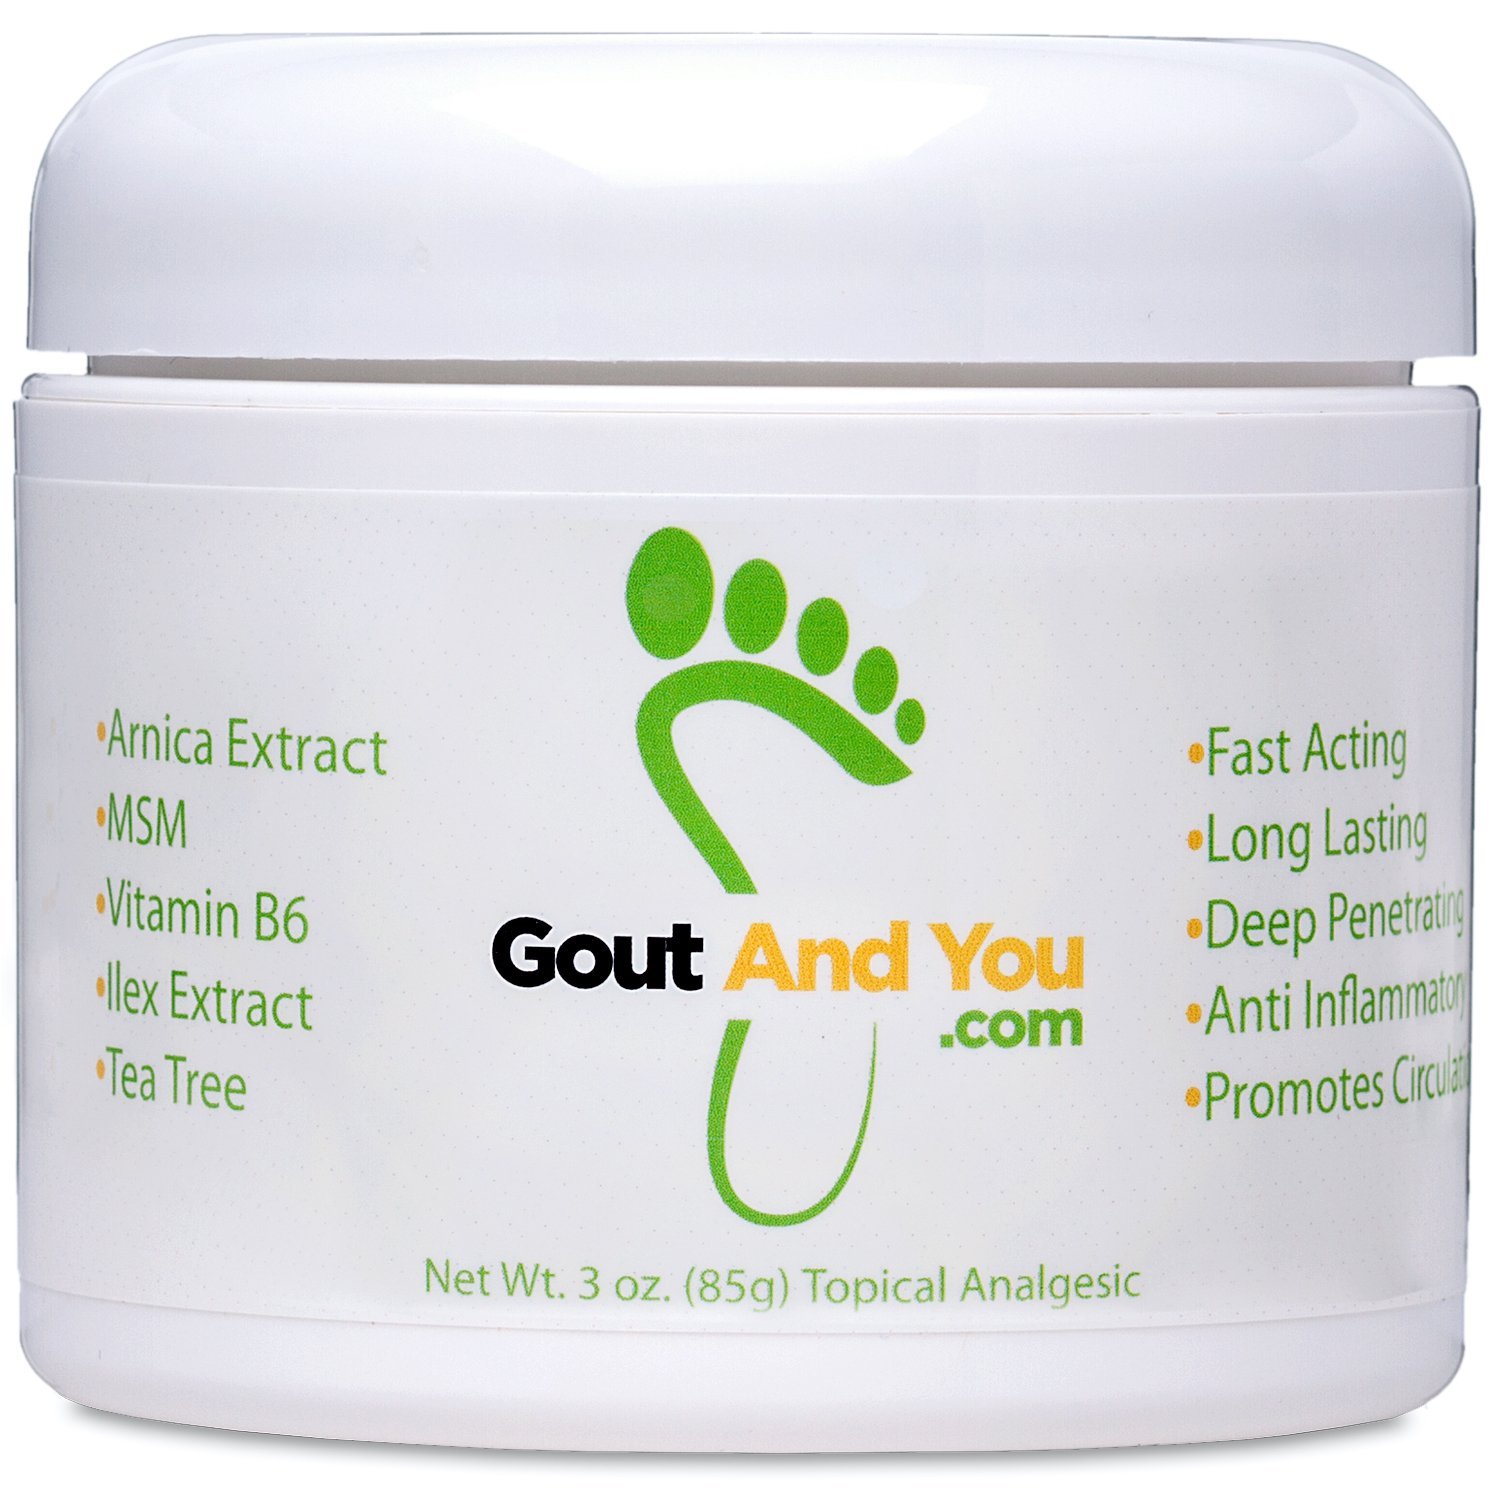 Relief Cream for Joint Discomfort, Flare-Ups, Tendon - Fast Acting Muscle Ache Relieving Rub with Arnica/Ilex Leaf Extract, Aloe Vera and Tea Tree Oil